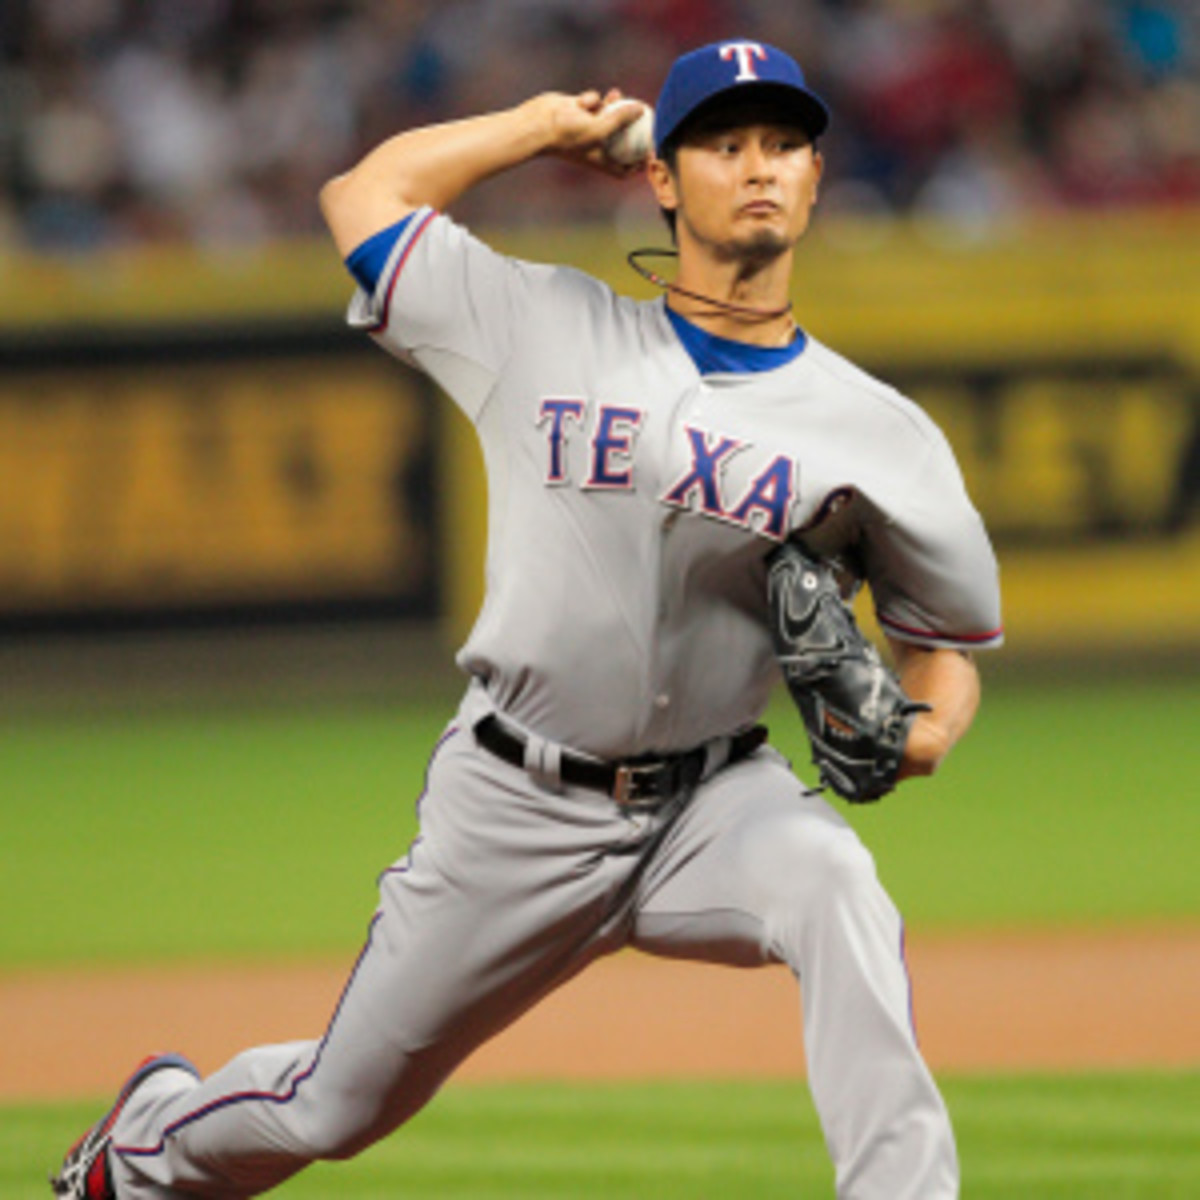 Astros announcer Alan Ashby apologized for comments about Yu Darvish. (Bob Levey/Getty Images)